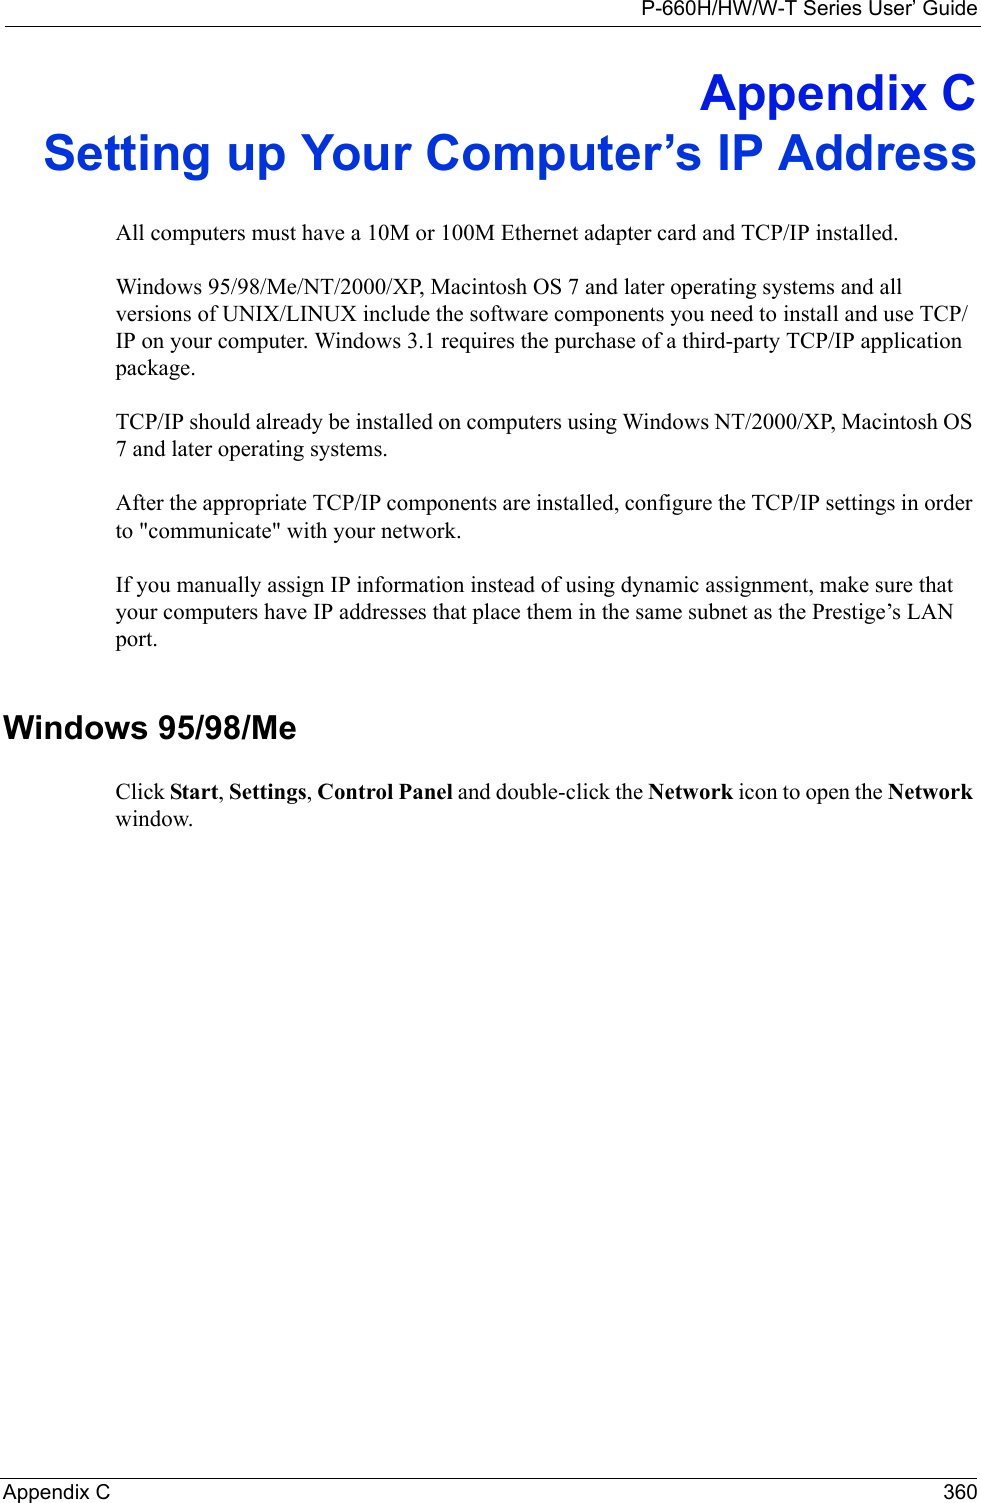 P-660H/HW/W-T Series User’ GuideAppendix C 360Appendix CSetting up Your Computer’s IP AddressAll computers must have a 10M or 100M Ethernet adapter card and TCP/IP installed. Windows 95/98/Me/NT/2000/XP, Macintosh OS 7 and later operating systems and all versions of UNIX/LINUX include the software components you need to install and use TCP/IP on your computer. Windows 3.1 requires the purchase of a third-party TCP/IP application package.TCP/IP should already be installed on computers using Windows NT/2000/XP, Macintosh OS 7 and later operating systems.After the appropriate TCP/IP components are installed, configure the TCP/IP settings in order to &quot;communicate&quot; with your network. If you manually assign IP information instead of using dynamic assignment, make sure that your computers have IP addresses that place them in the same subnet as the Prestige’s LAN port.Windows 95/98/MeClick Start, Settings, Control Panel and double-click the Network icon to open the Network window.